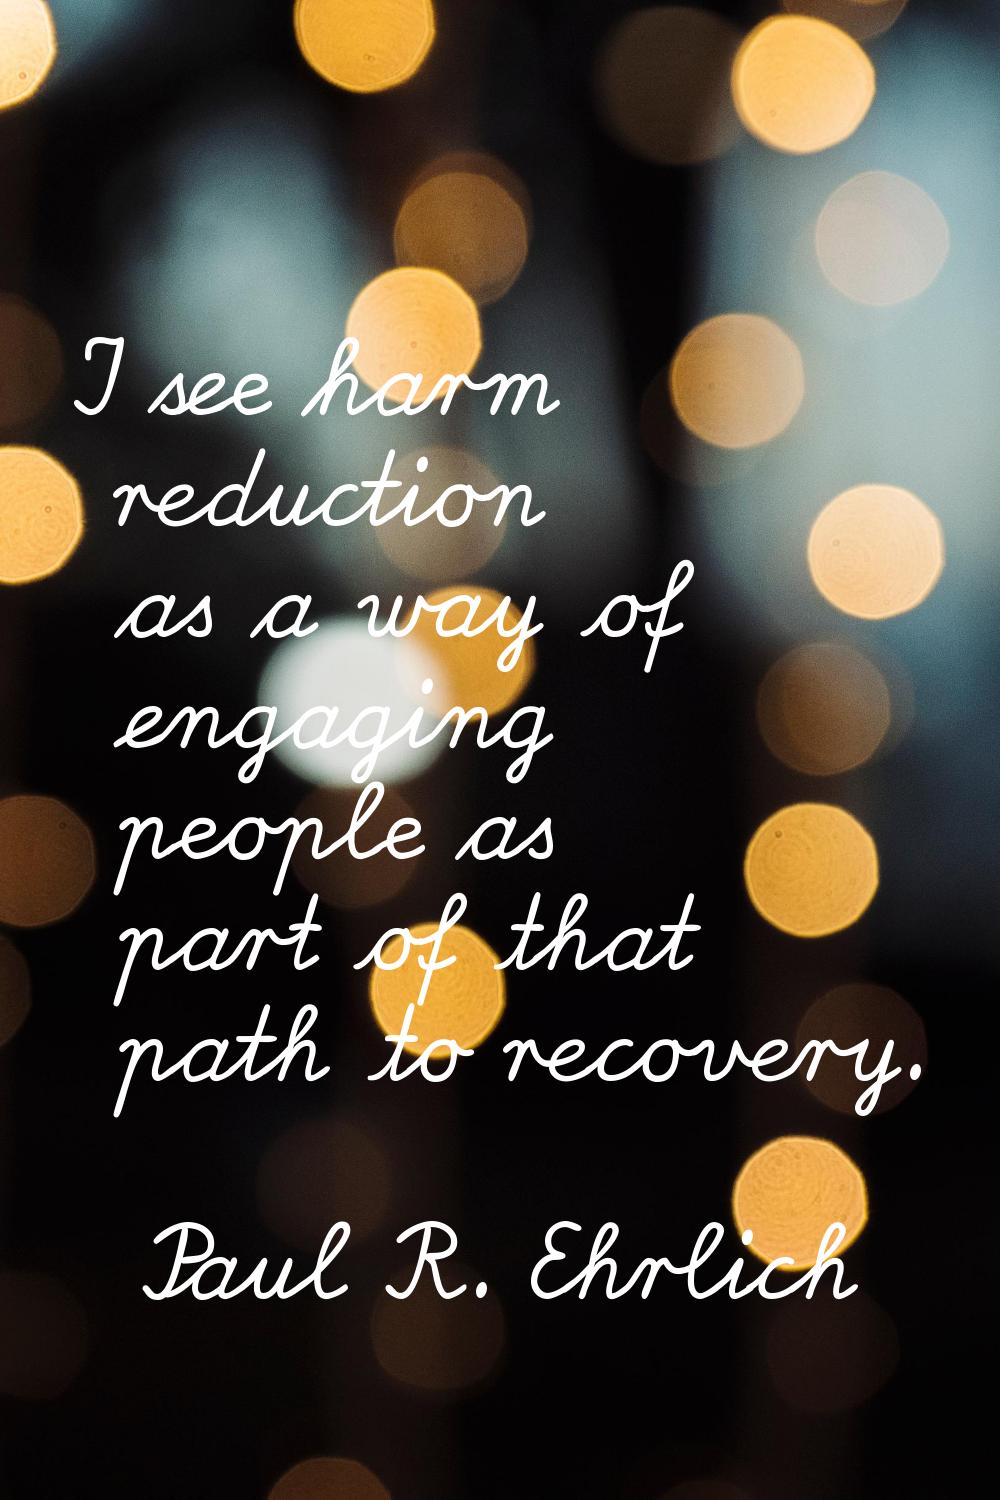 I see harm reduction as a way of engaging people as part of that path to recovery.